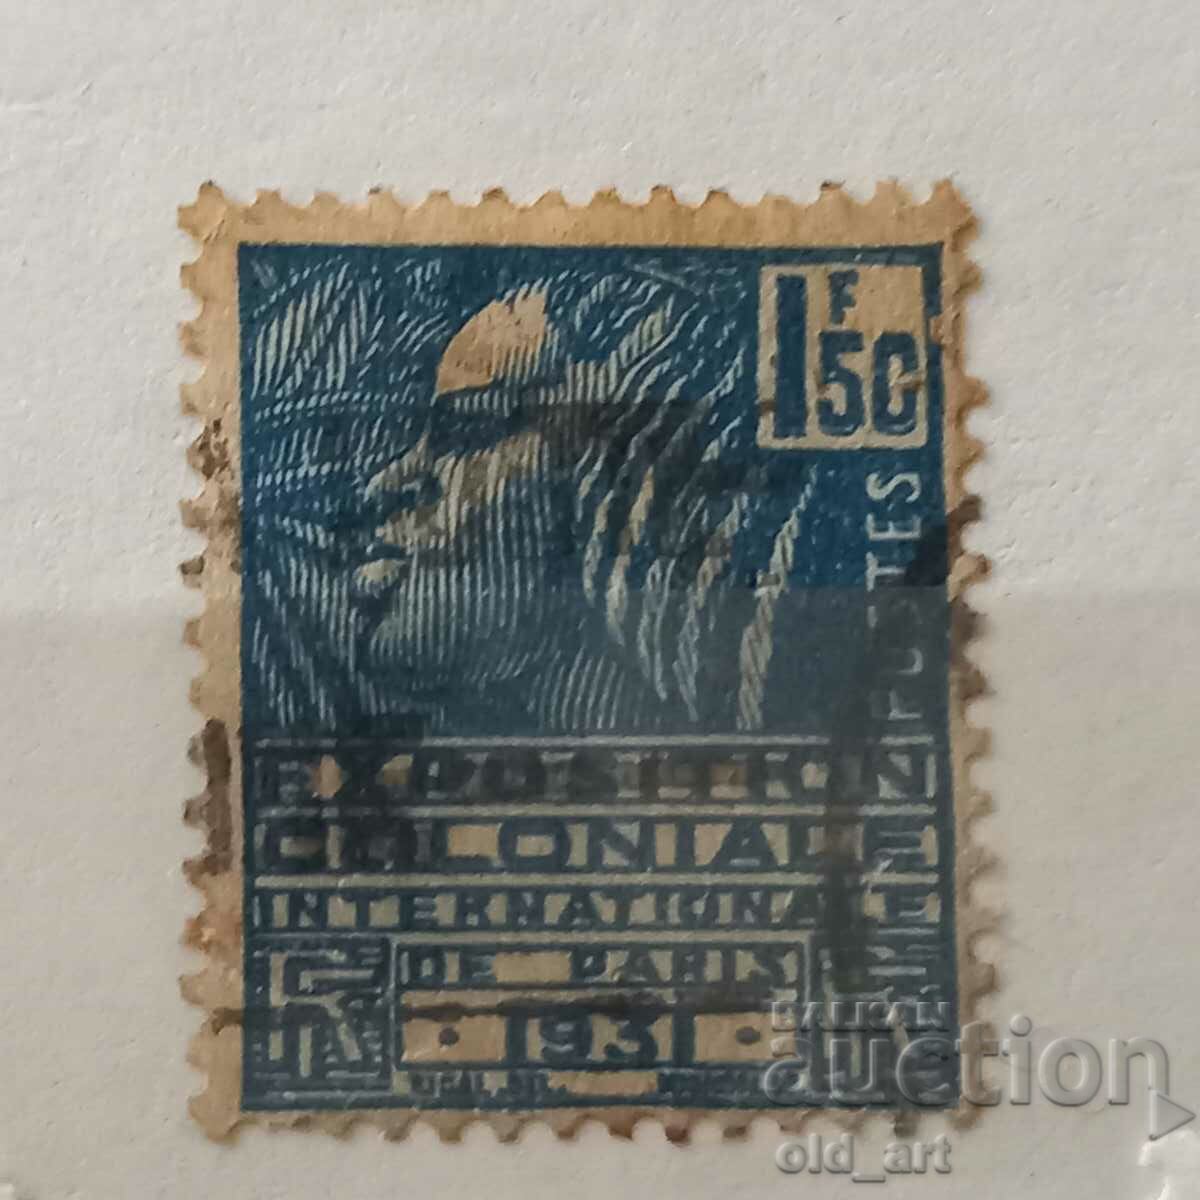 Postage stamp - France, Int. colonial exhibition 1930